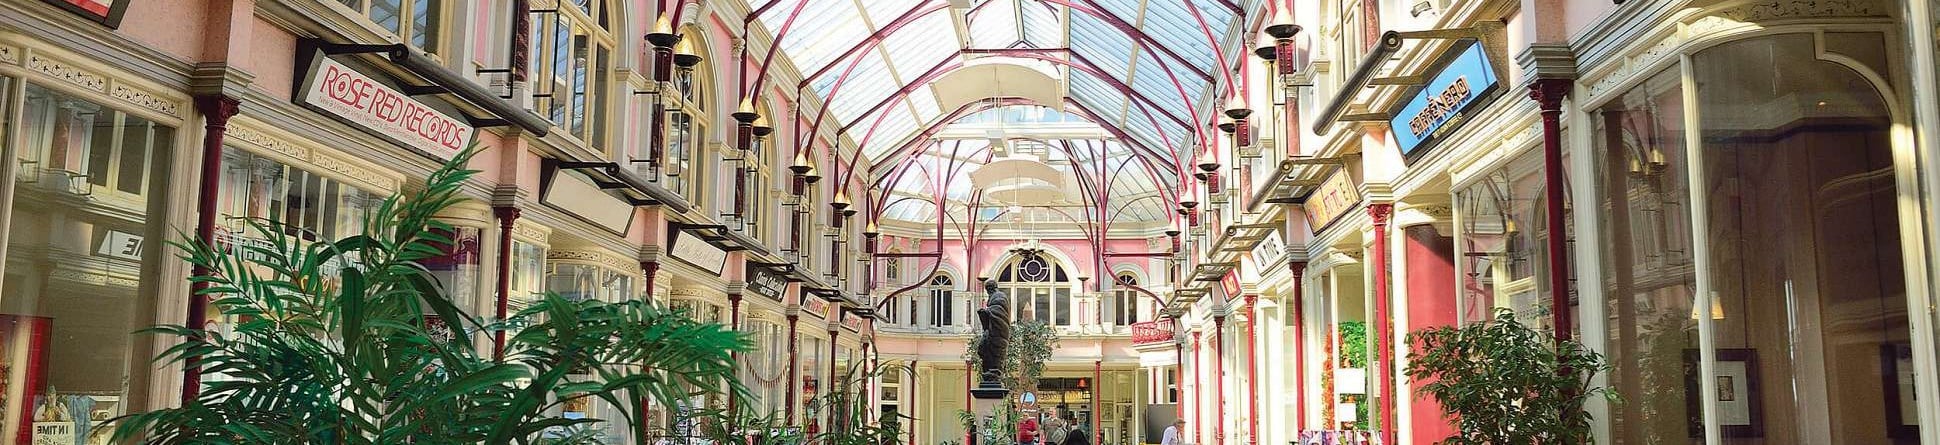 Image of Boscombe's Royal Arcade in Bournemouth